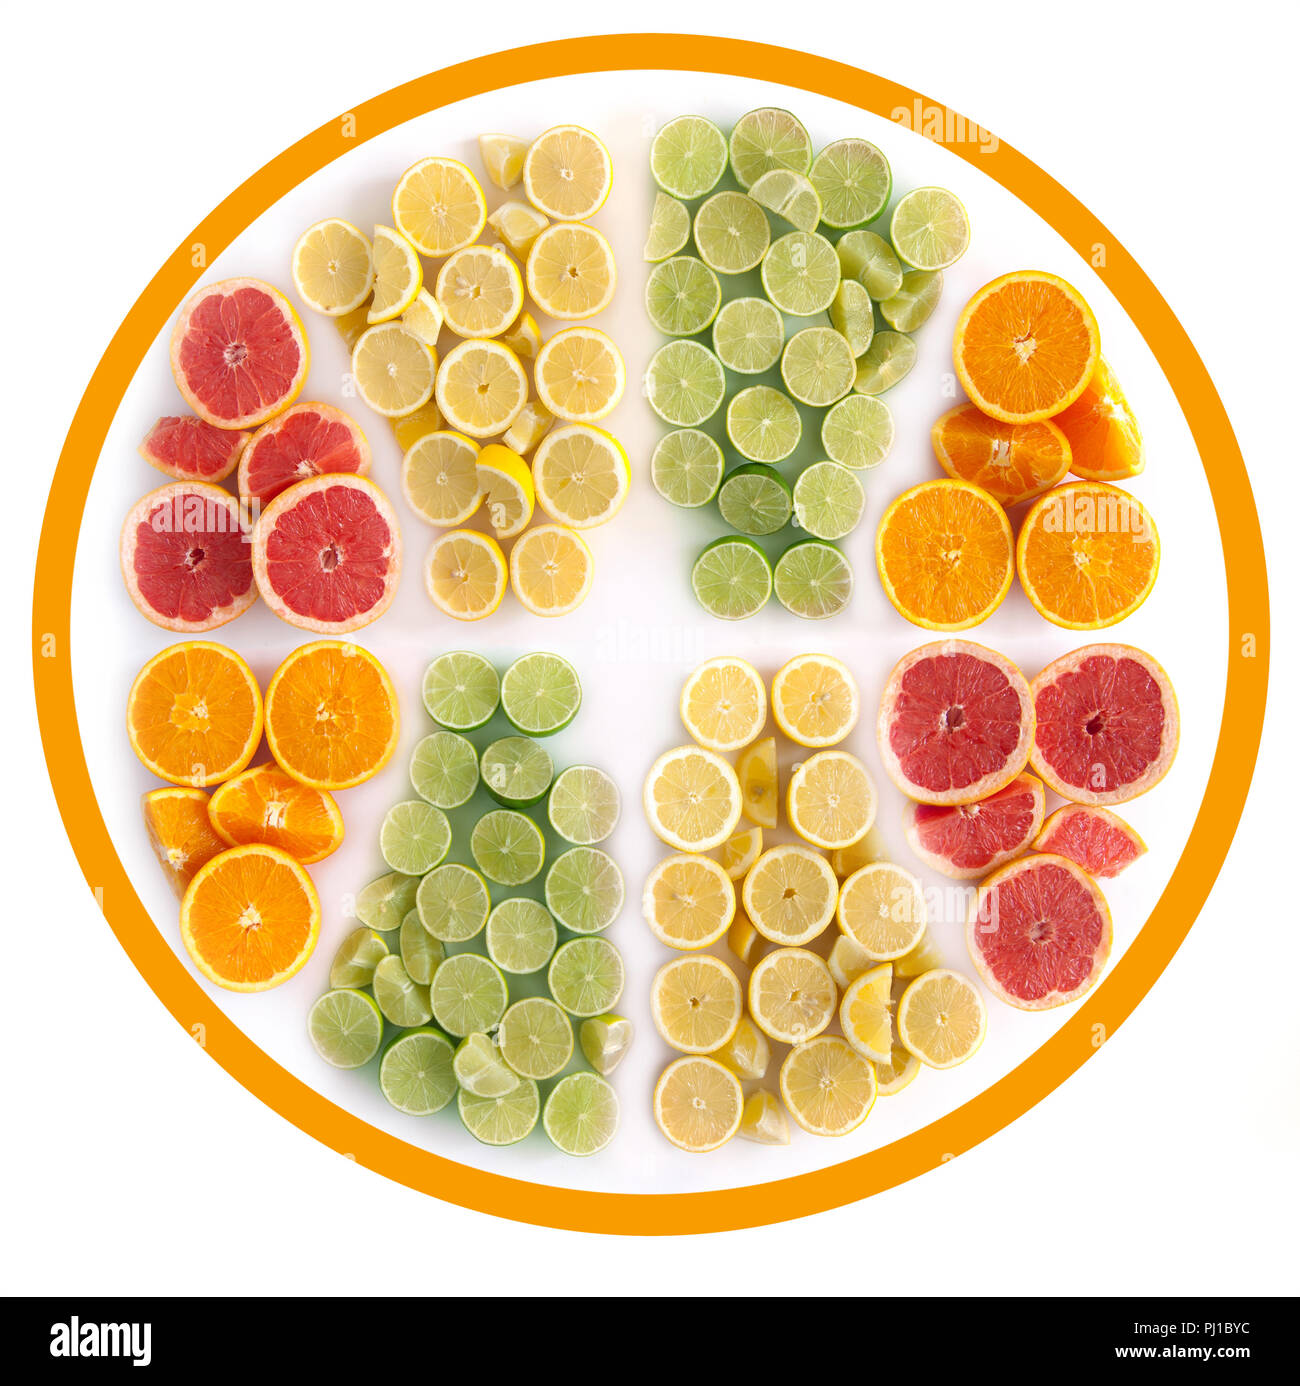 Many fruits in the shape of a sliced citrus including oranges, grapefruits, lemons and limes Stock Photo